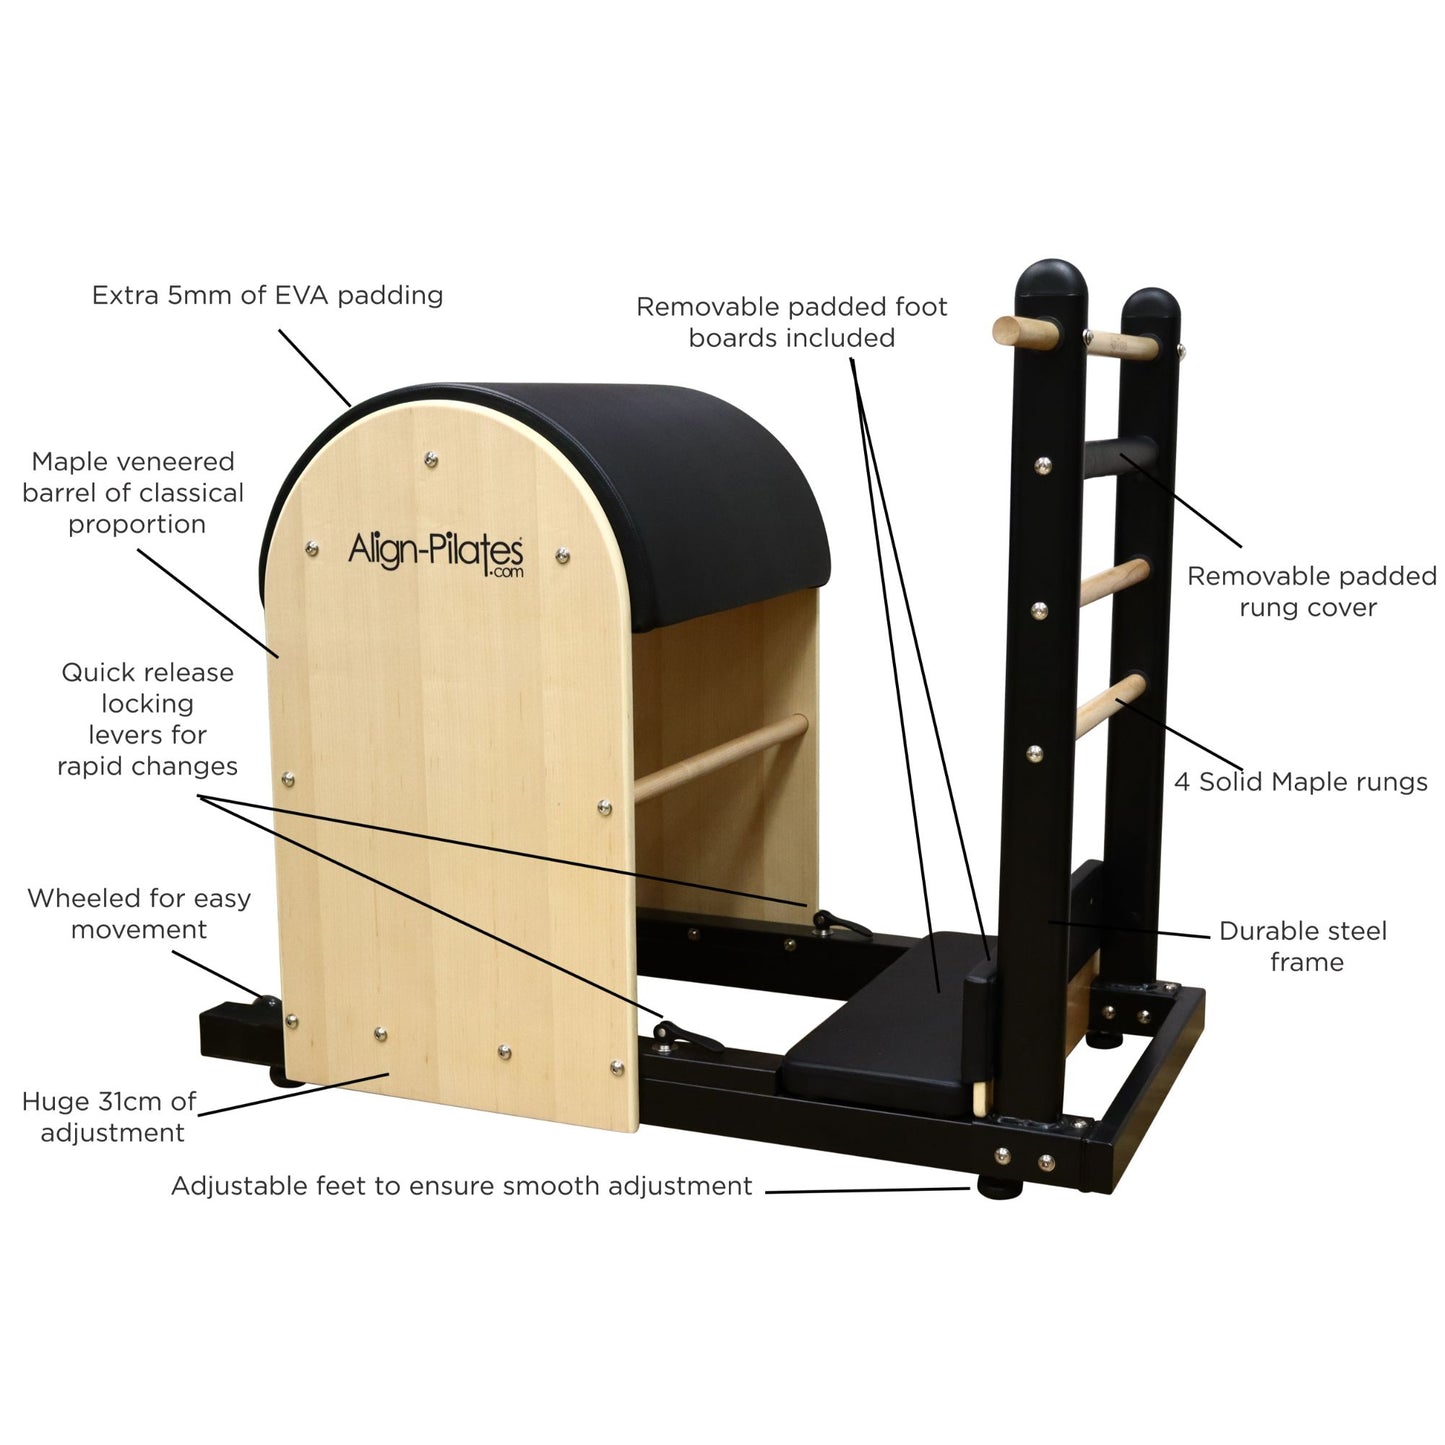 Fitkon Ladder Barrel For The Lowest Price with Free Shipping